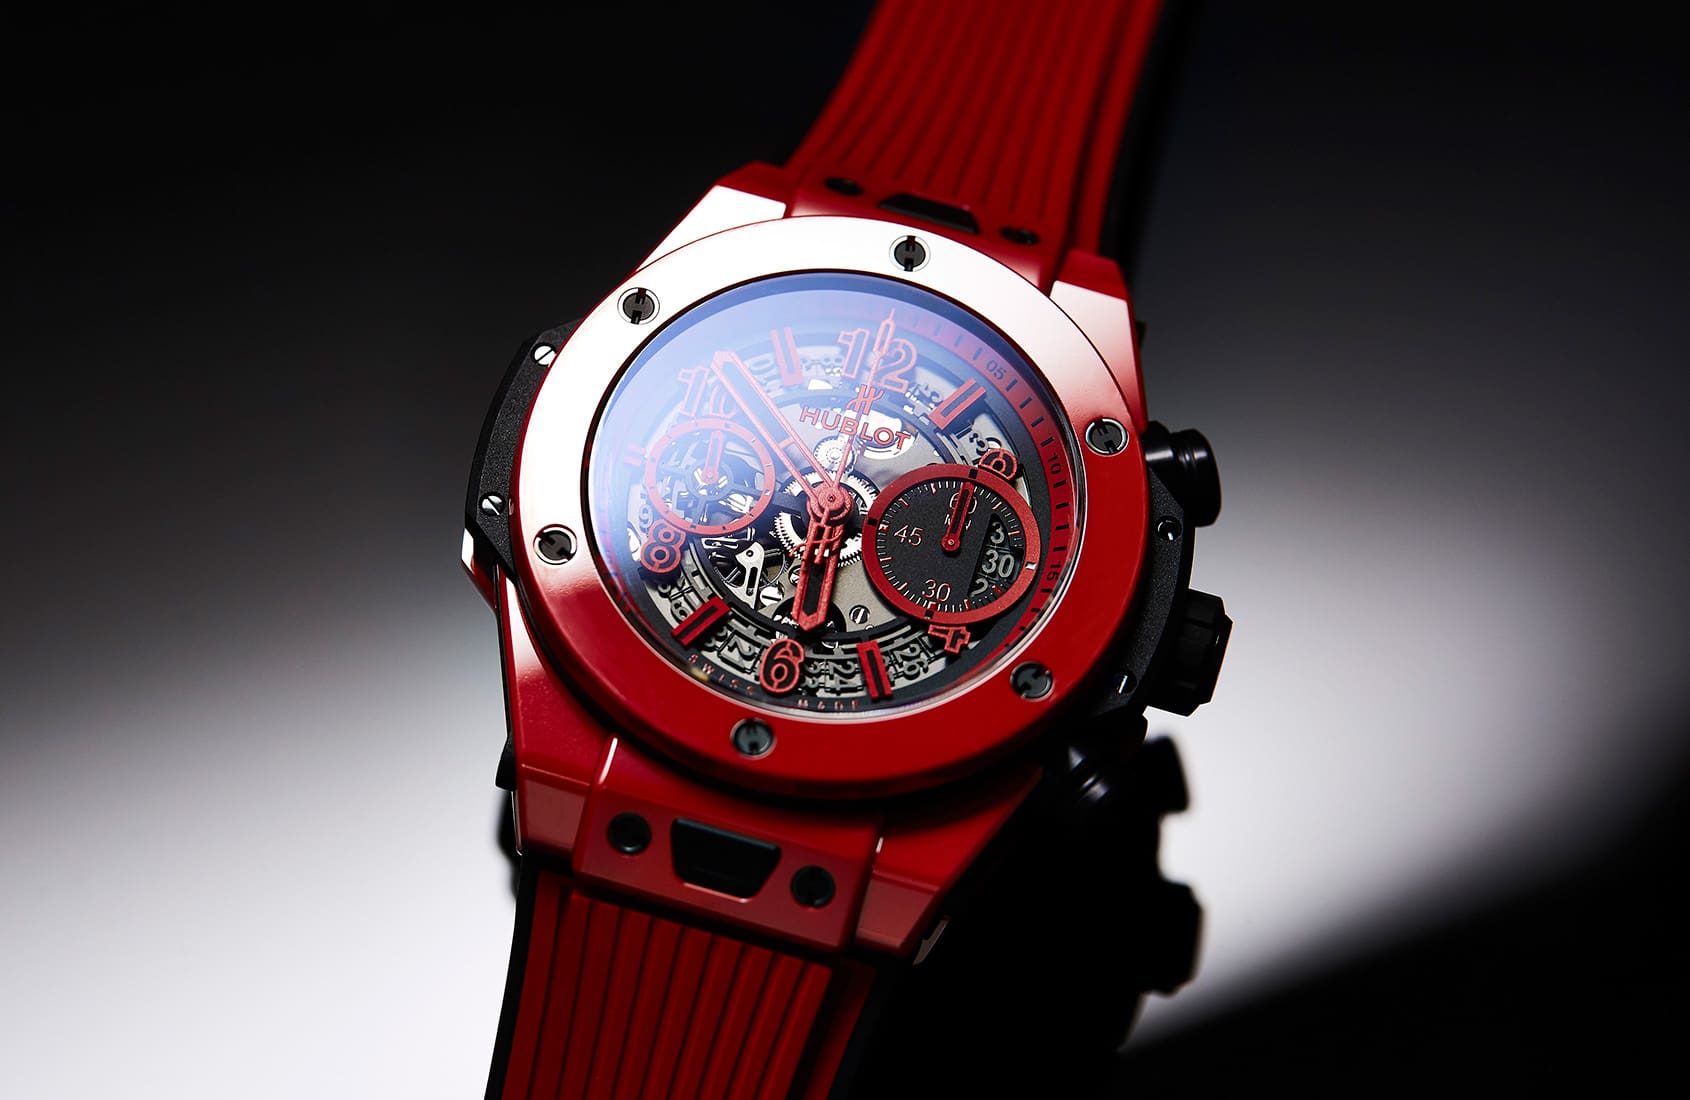 They don’t come much brighter than the Hublot Big Bang Red Magic